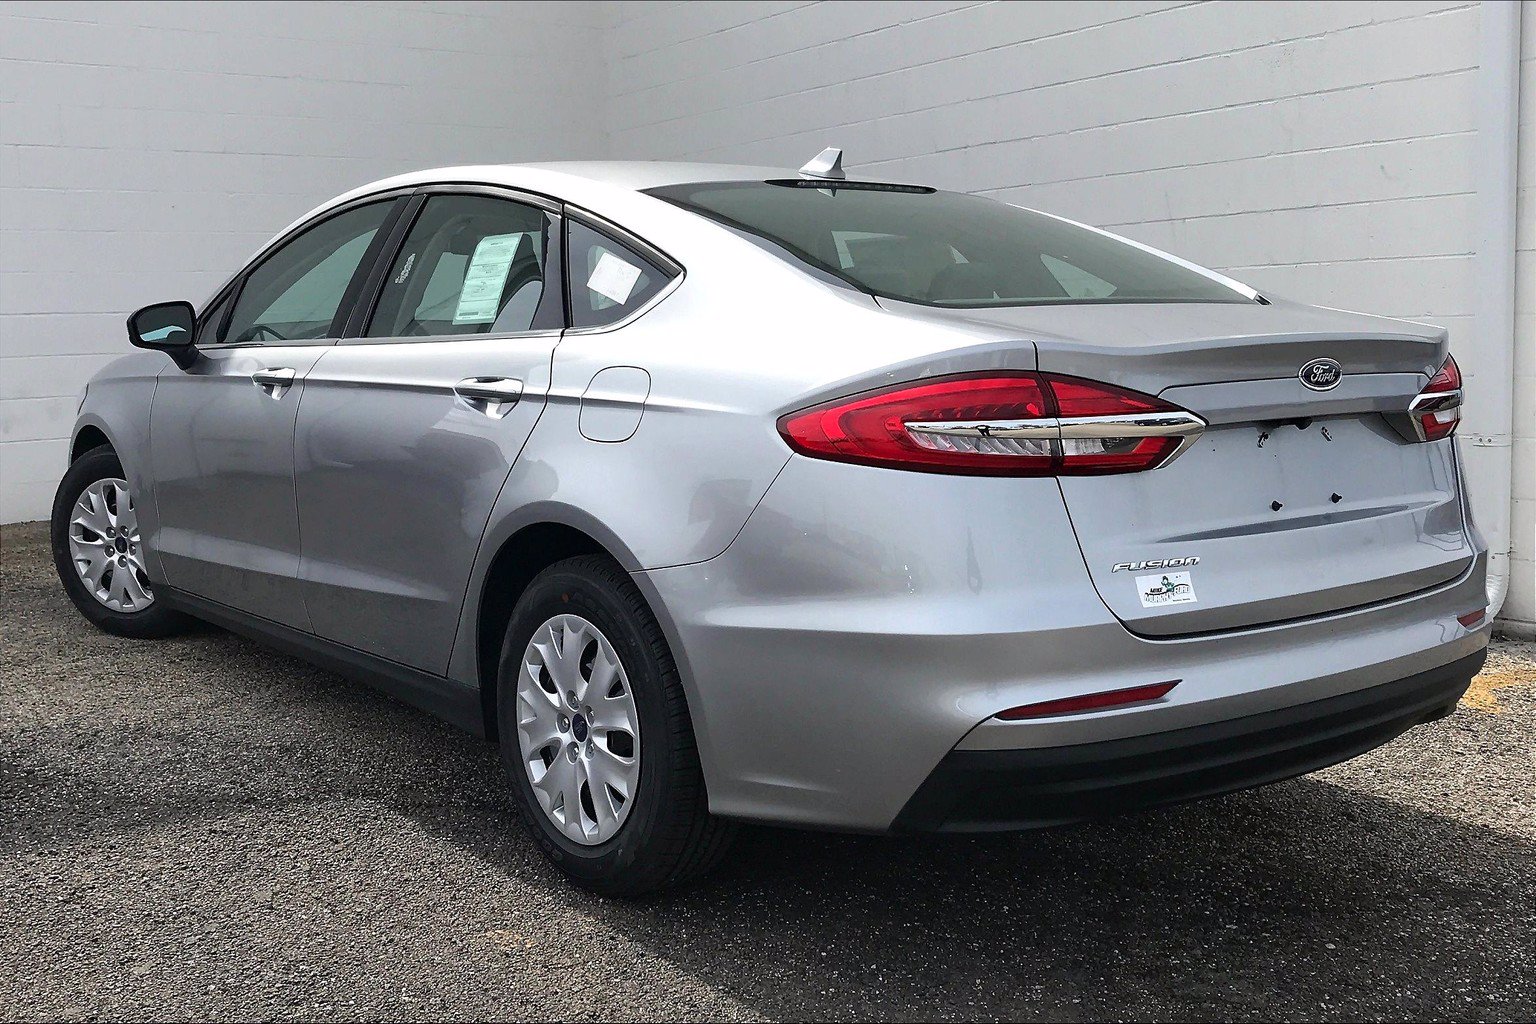 New 2020 Ford Fusion S 4D Sedan in Morton #162748 | Mike Murphy Ford